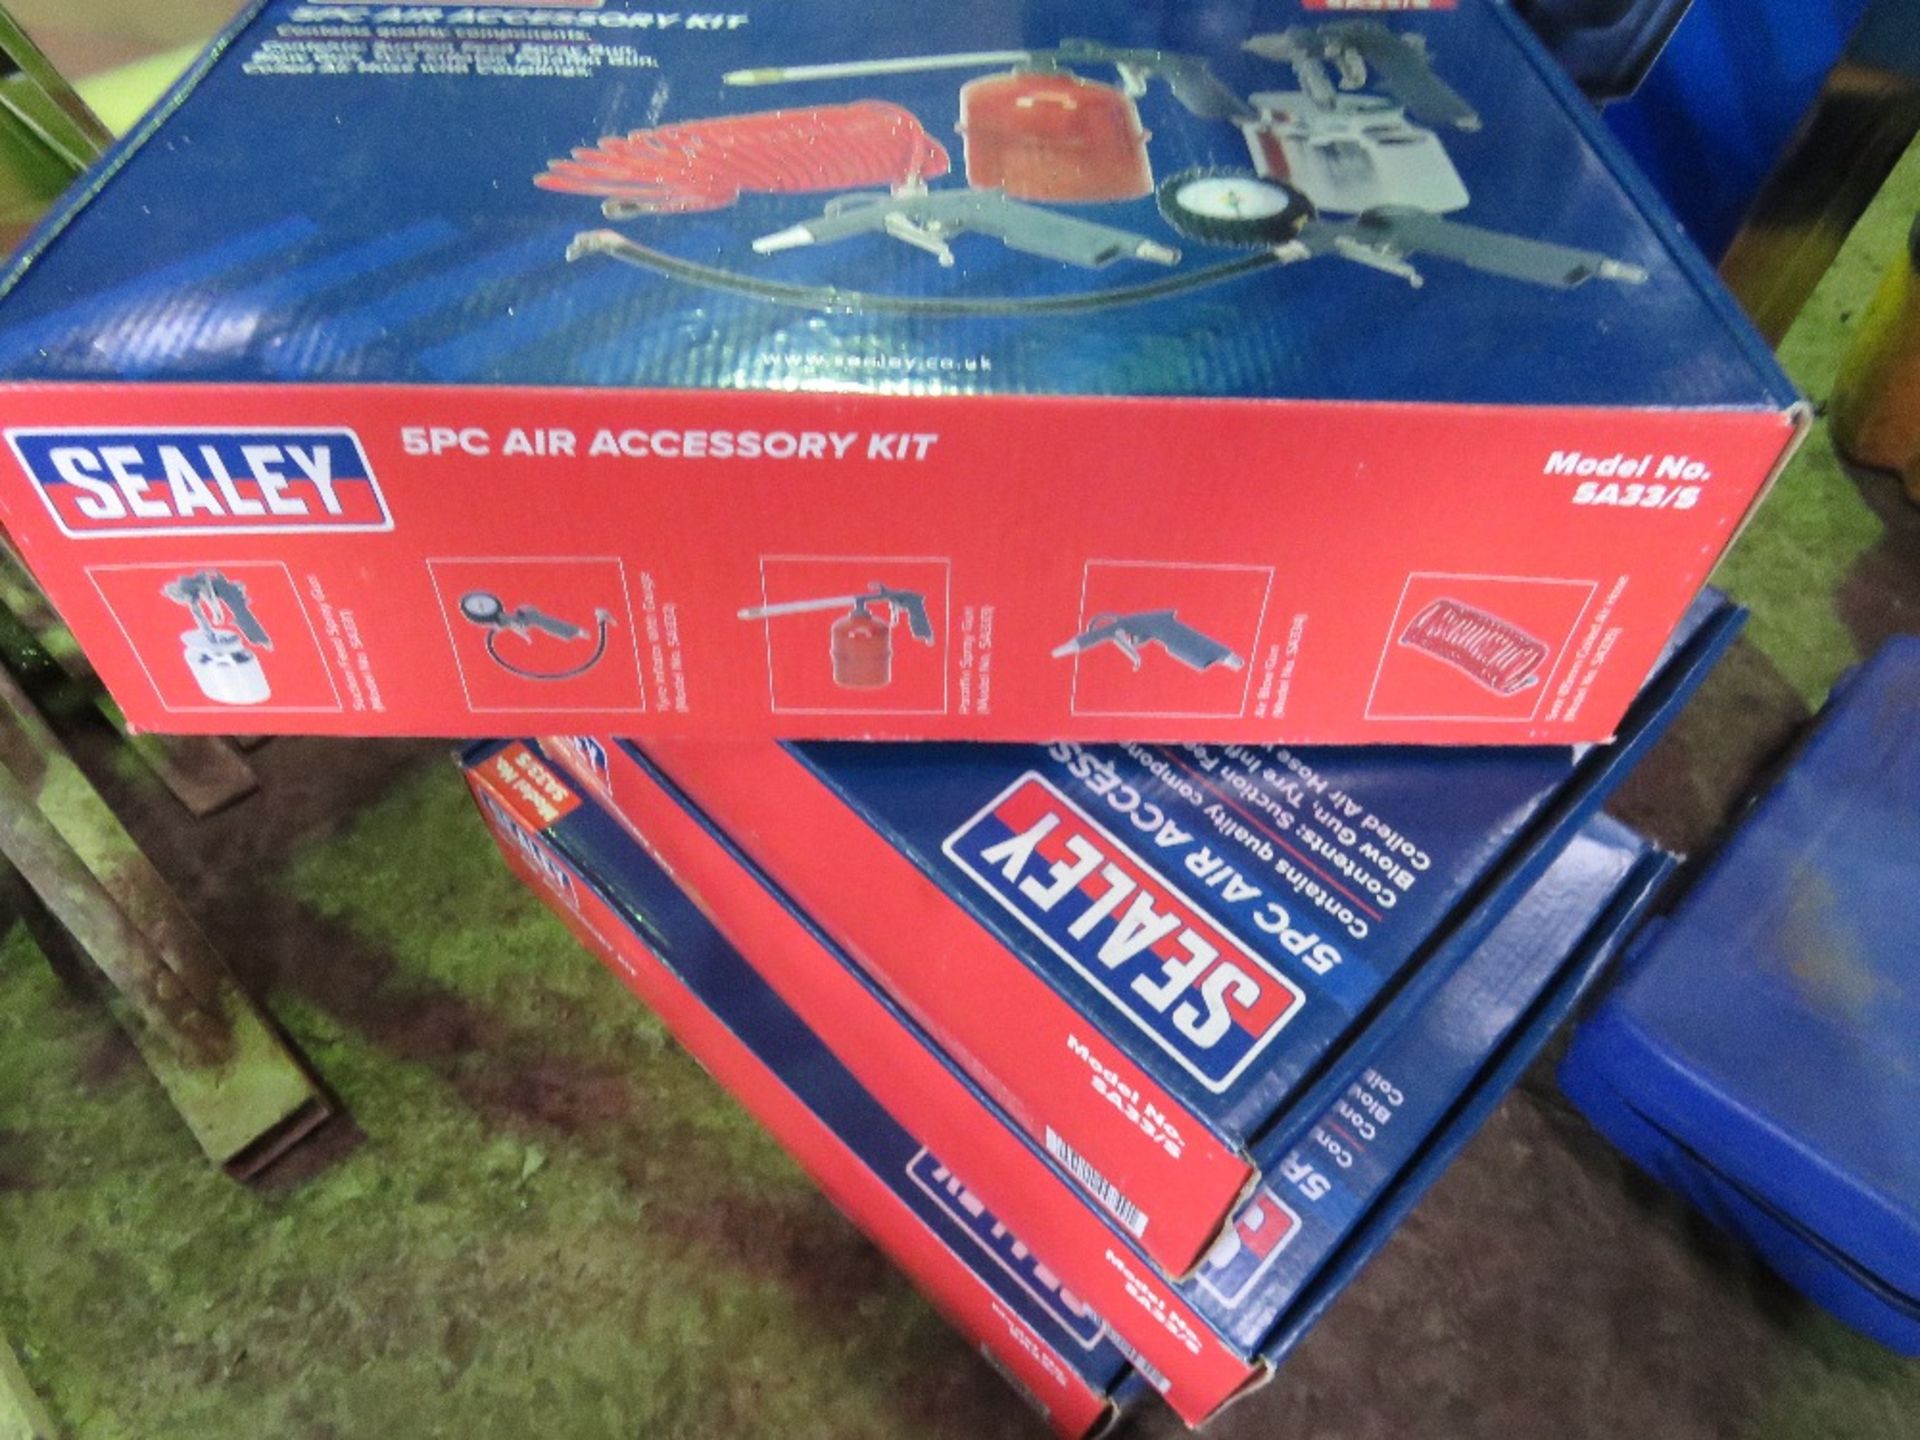 5 X SEALEY 5 PIECE AIR TOOL SETS. BOXED, UNUSED, DIRECT FROM LOCAL COMPANY BEING SURPLUS STOCK. - Image 3 of 4